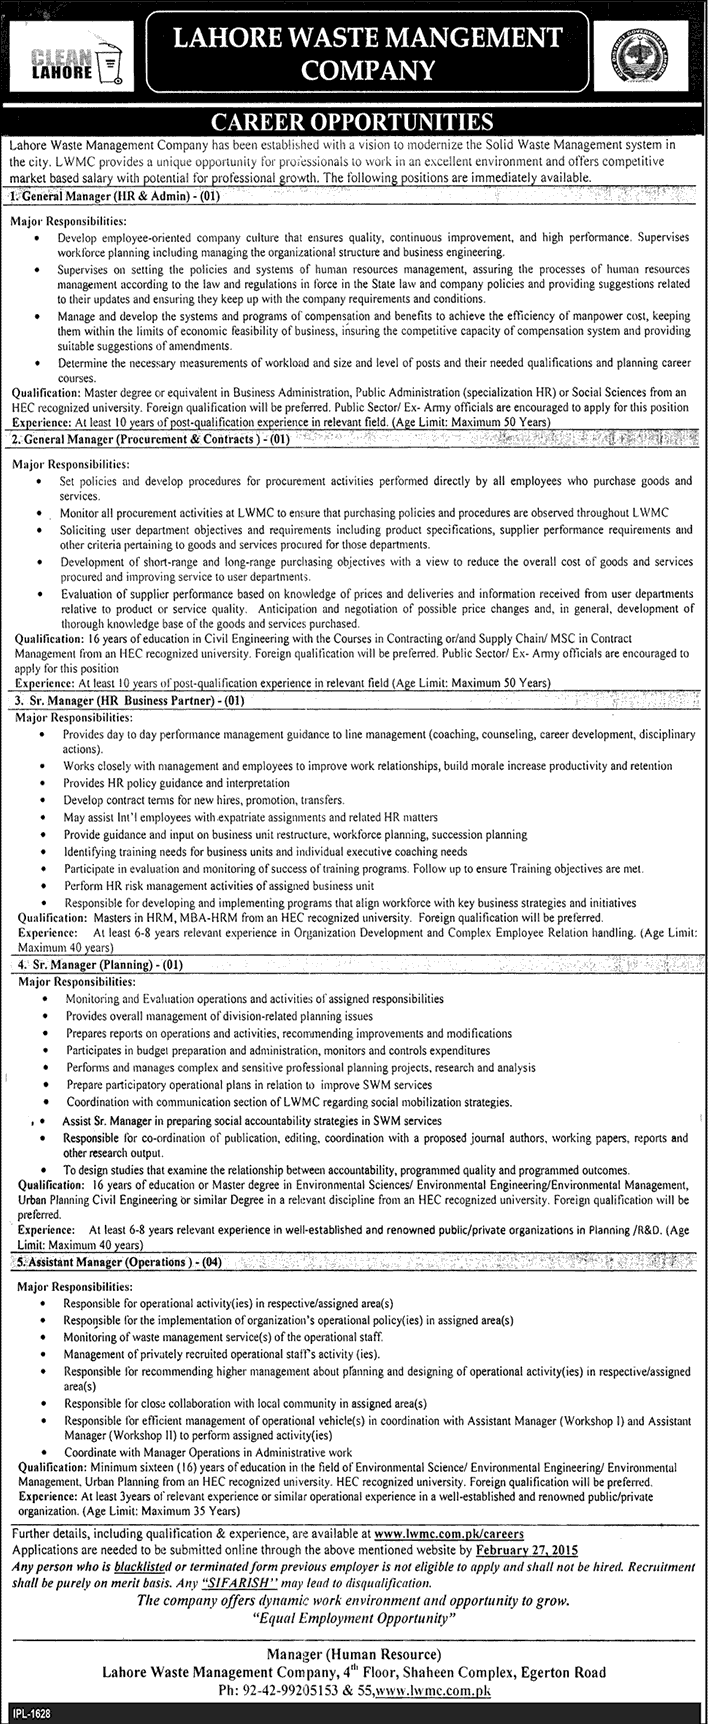 Lahore Waste Management Company Jobs 2015 February Managers HR / Admin / Procurement / Planning & Operations